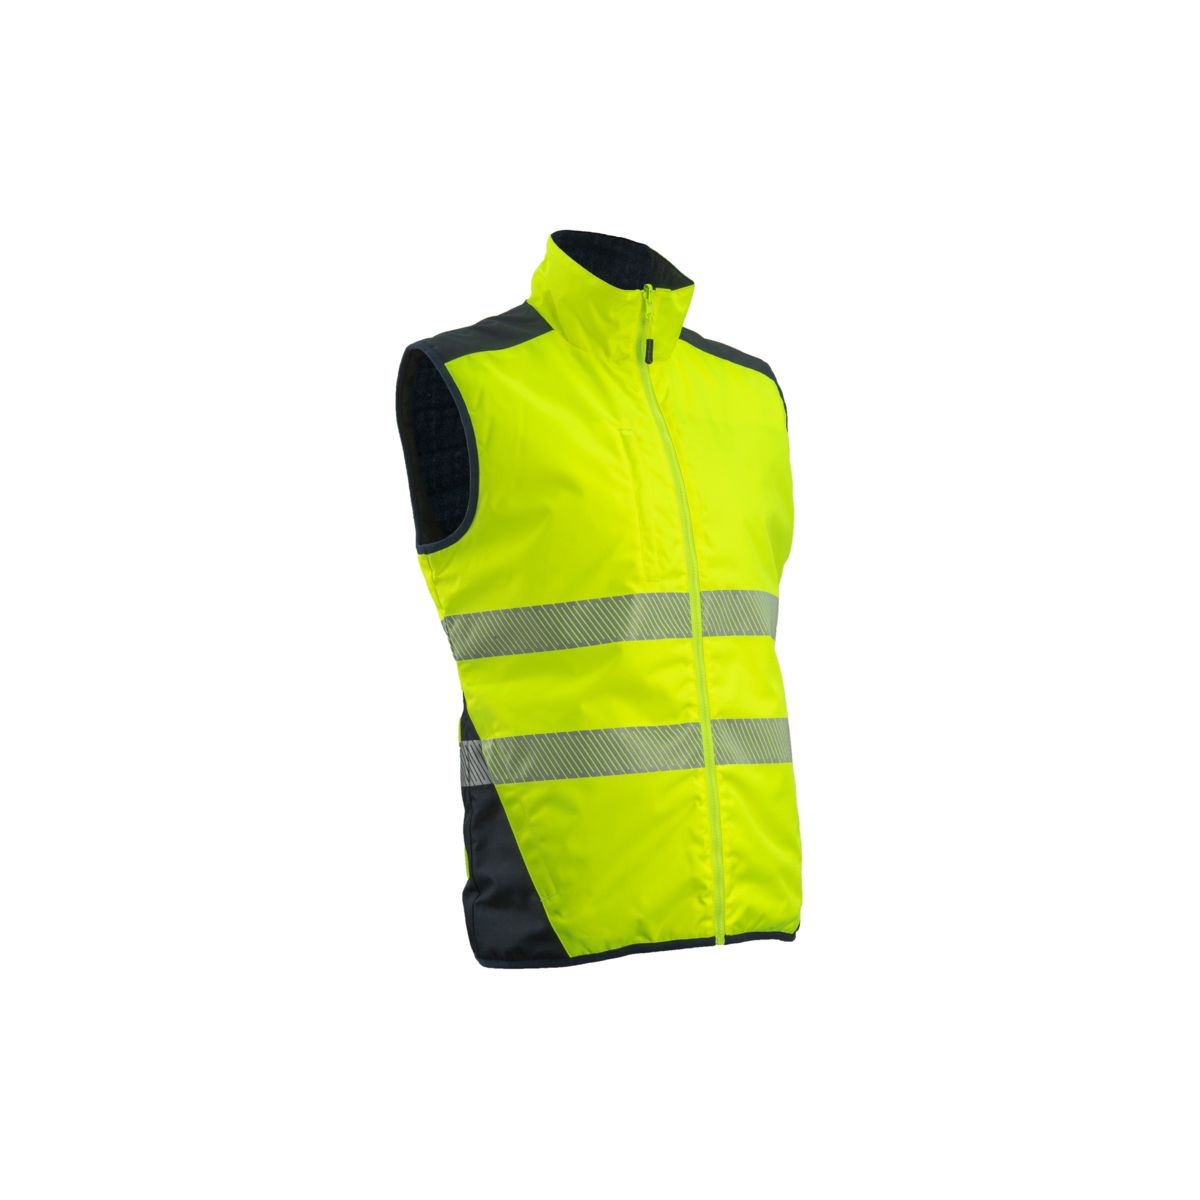 Gilet YORU froid réversible jaune HV/marine, Ripstop 100%PES maille - COVERGUARD - Taille M 0